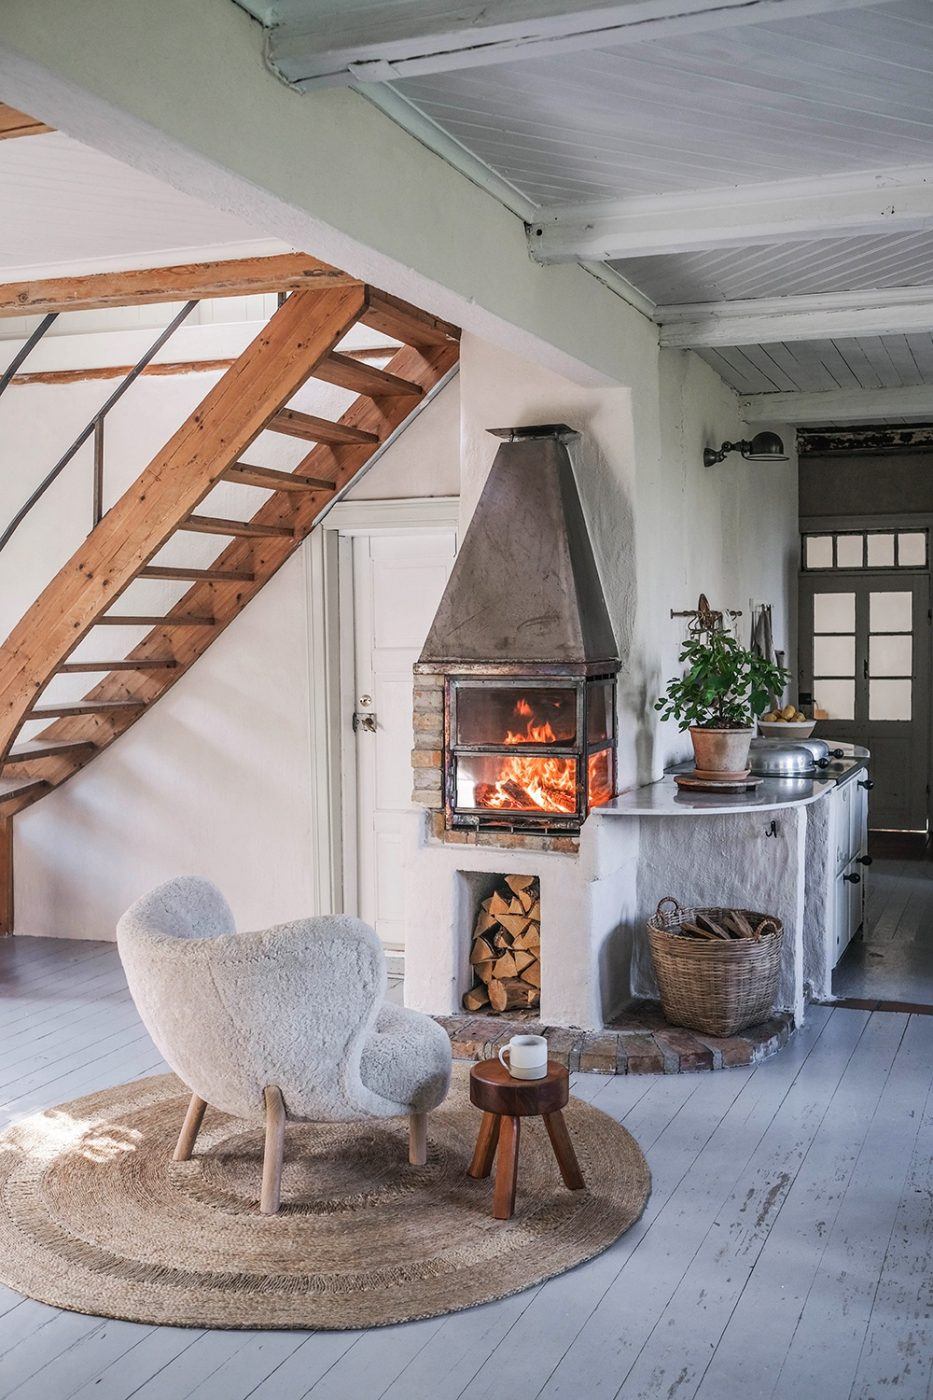 Image for House Tour – Our Swedish Vacation House